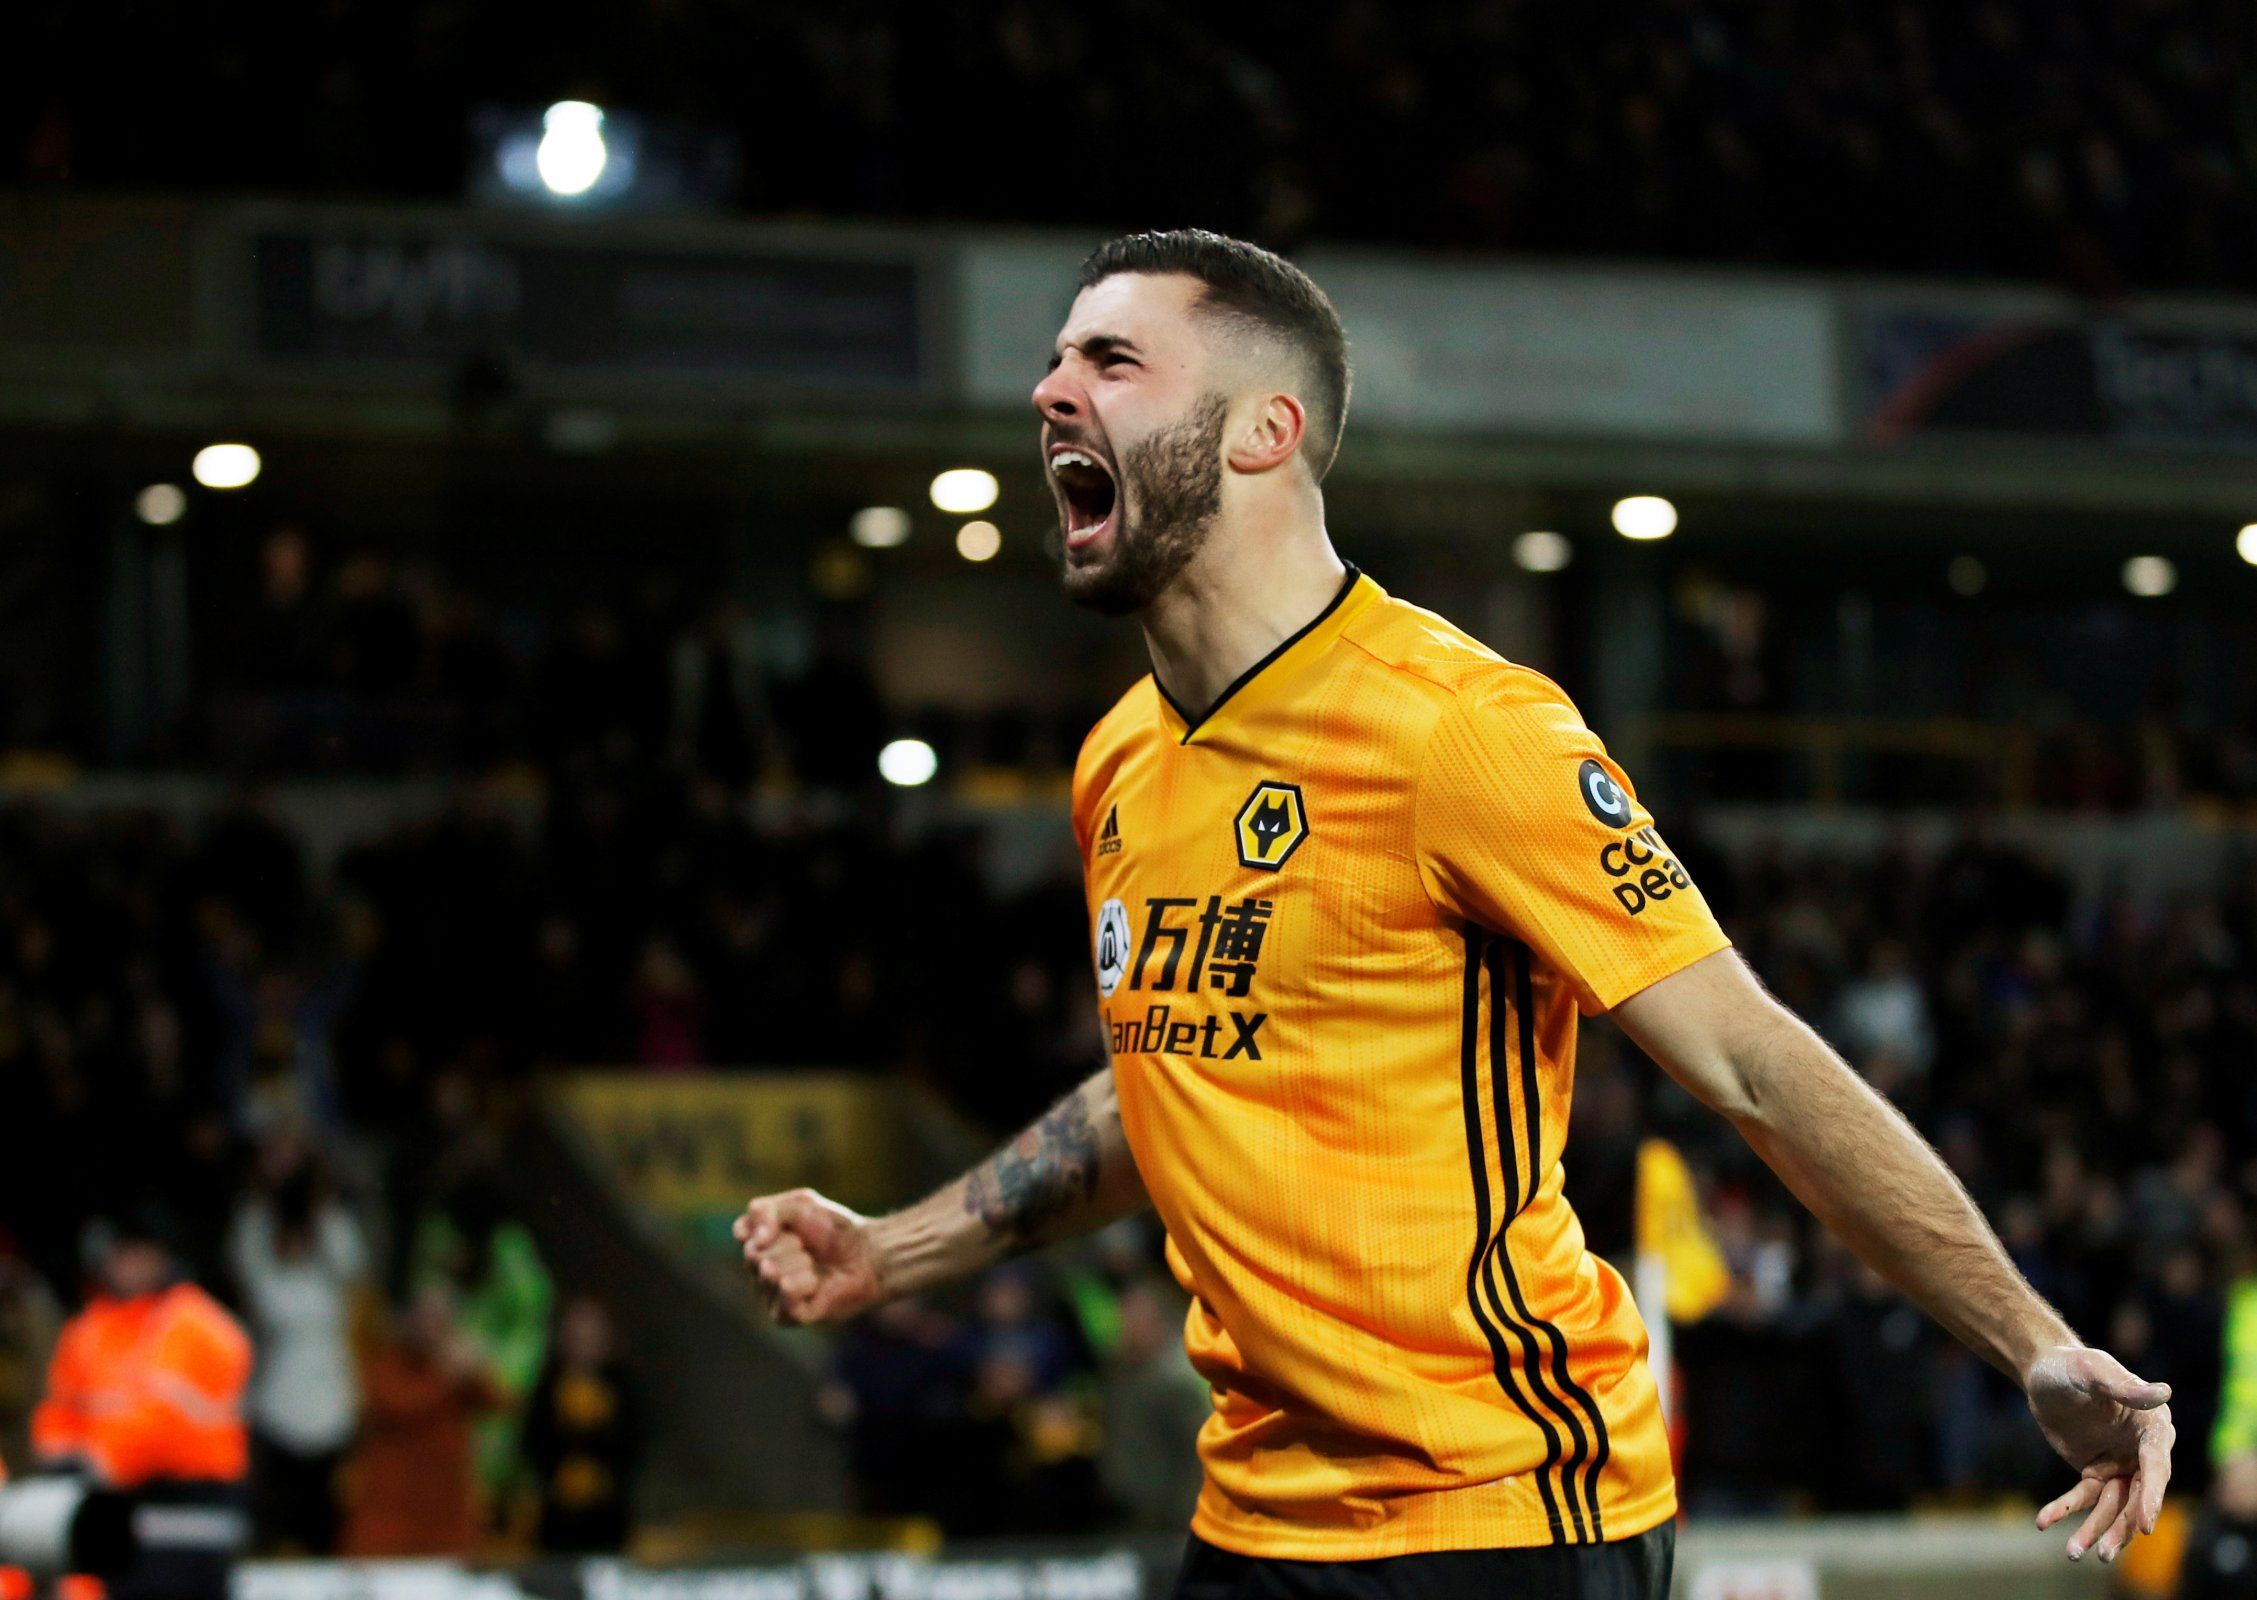 Bruno Lage, Fosun, Jeff Shi, Molineux, The Old Gold, Wolves, Wolves fans, Wolves info, Wolves latest, Wolves news, Wolves updates, WWFC, WWFC news, WWFC update, Premier League, Premier League news, Wolverhampton Wanderers, Opinion, Patrick Cutrone, 
